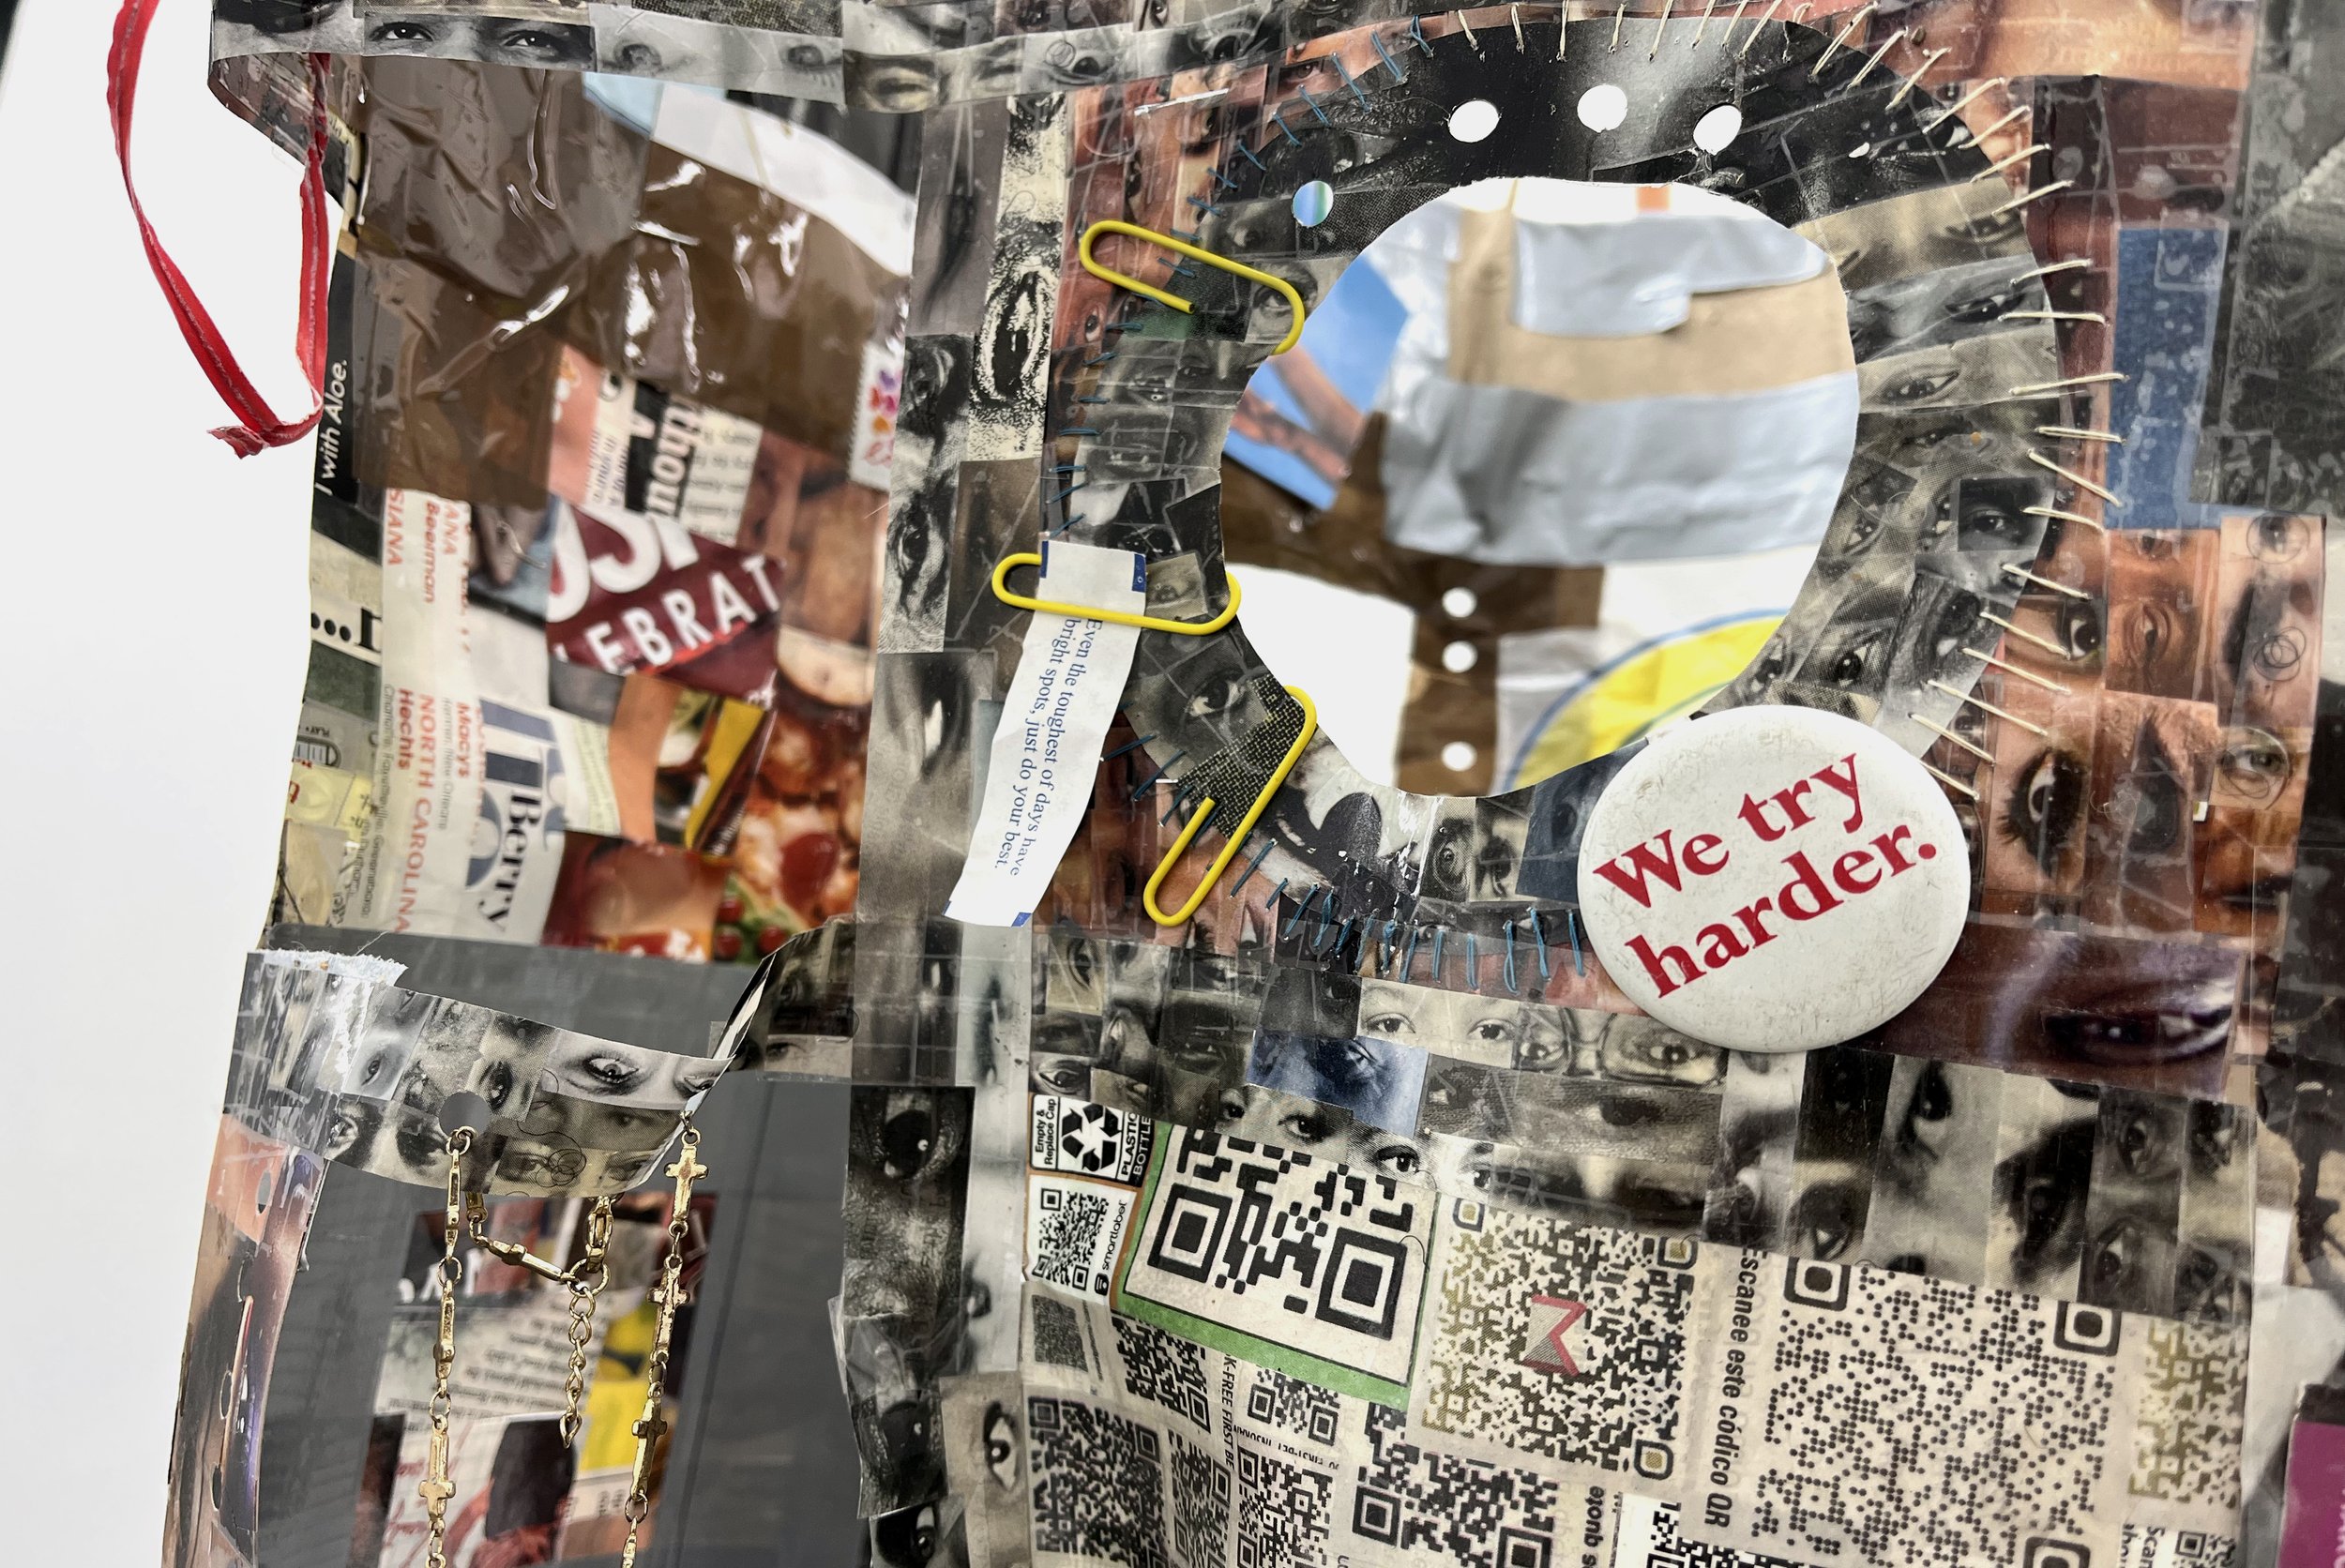  Elzie Williams III  If I Ruled The World (Time Traveler Bag) , 2023 (detail) magazines, found qr codes, clear tape, found objects, copper  26 x 18 x 6 inches (66 x 46 x 15 cm) EW9 